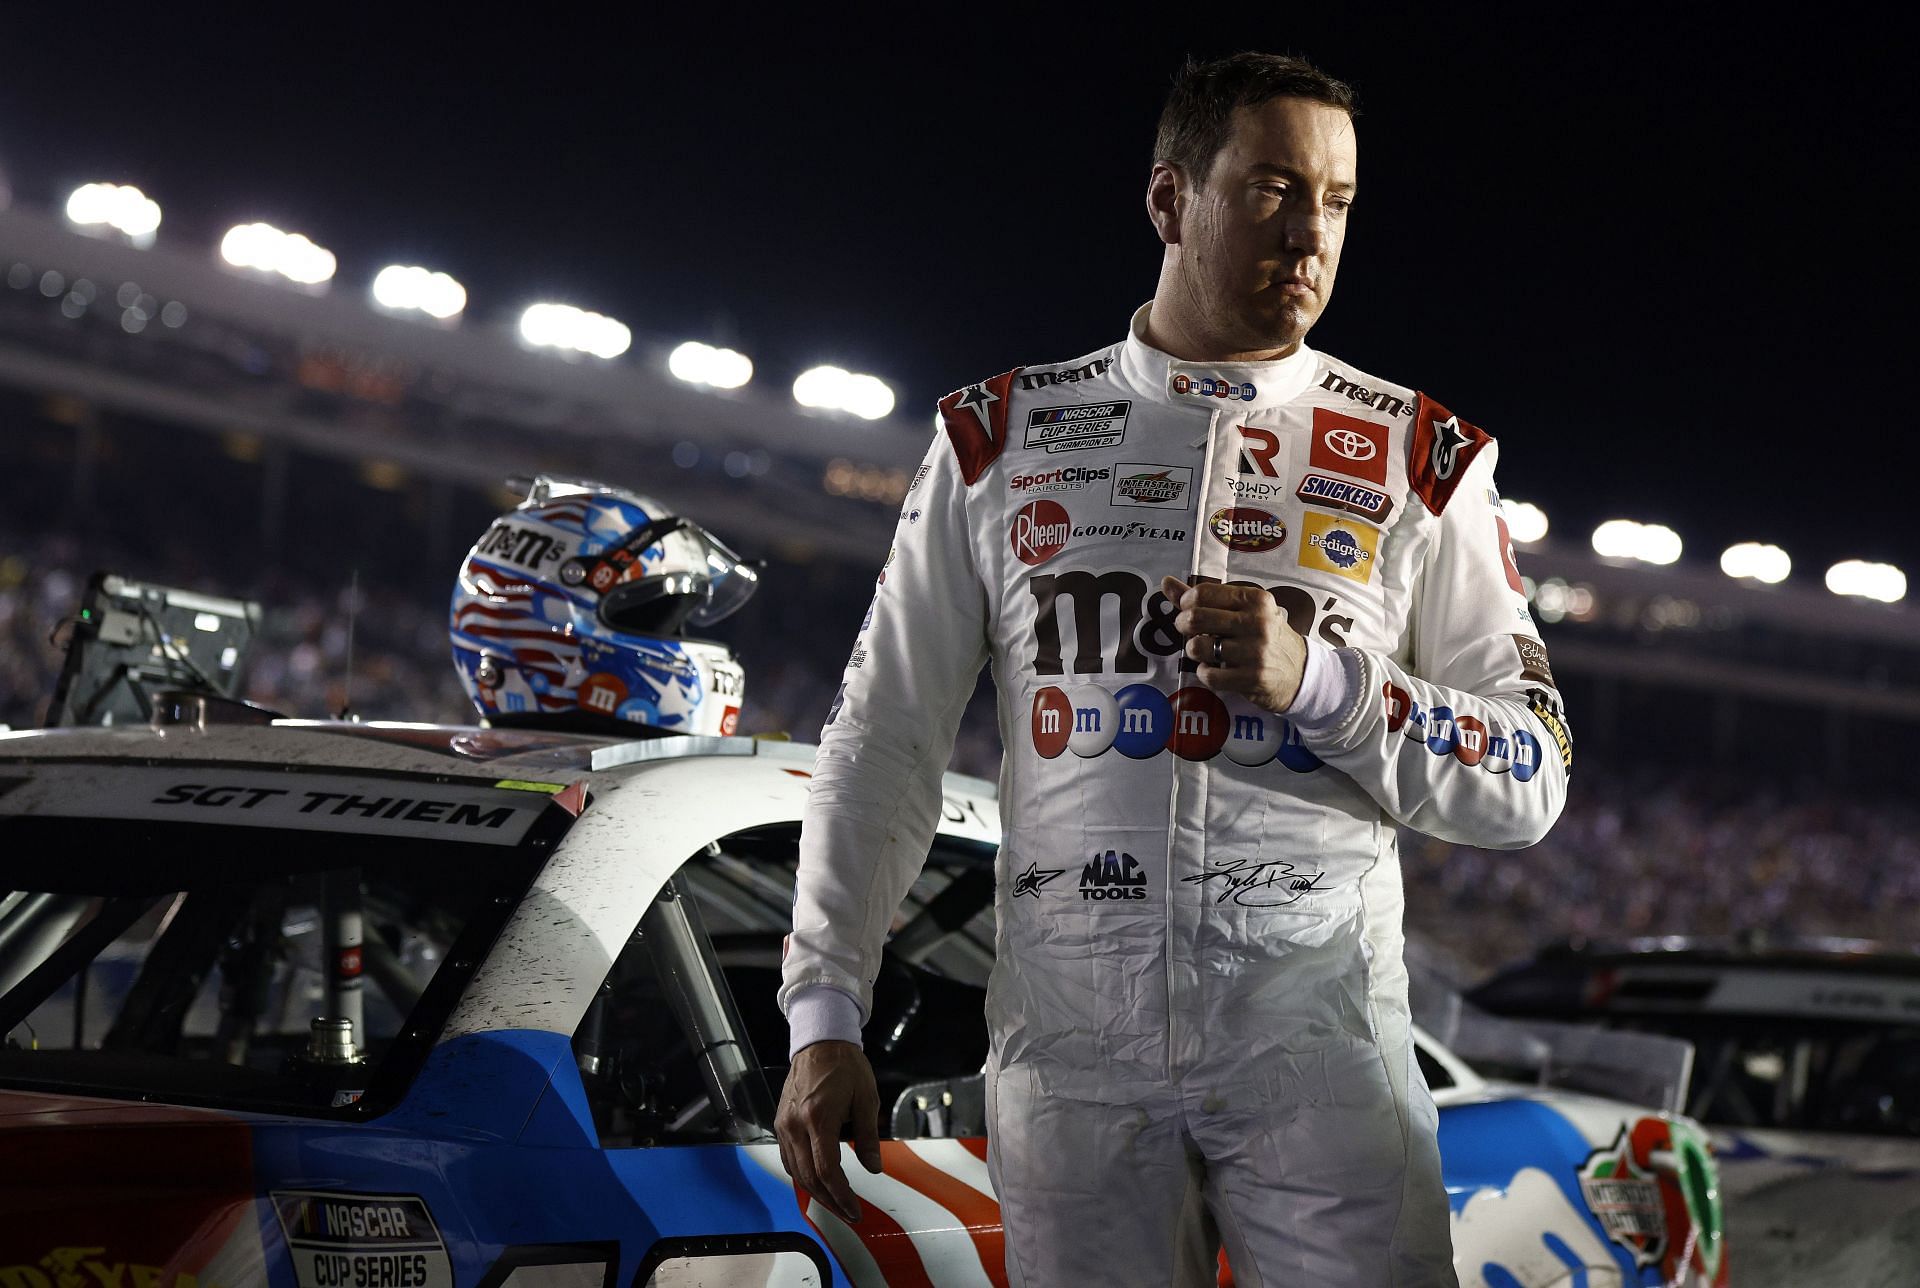 Busch exits his car after the NASCAR Cup Series Coca-Cola 600 at Charlotte Motor Speedway